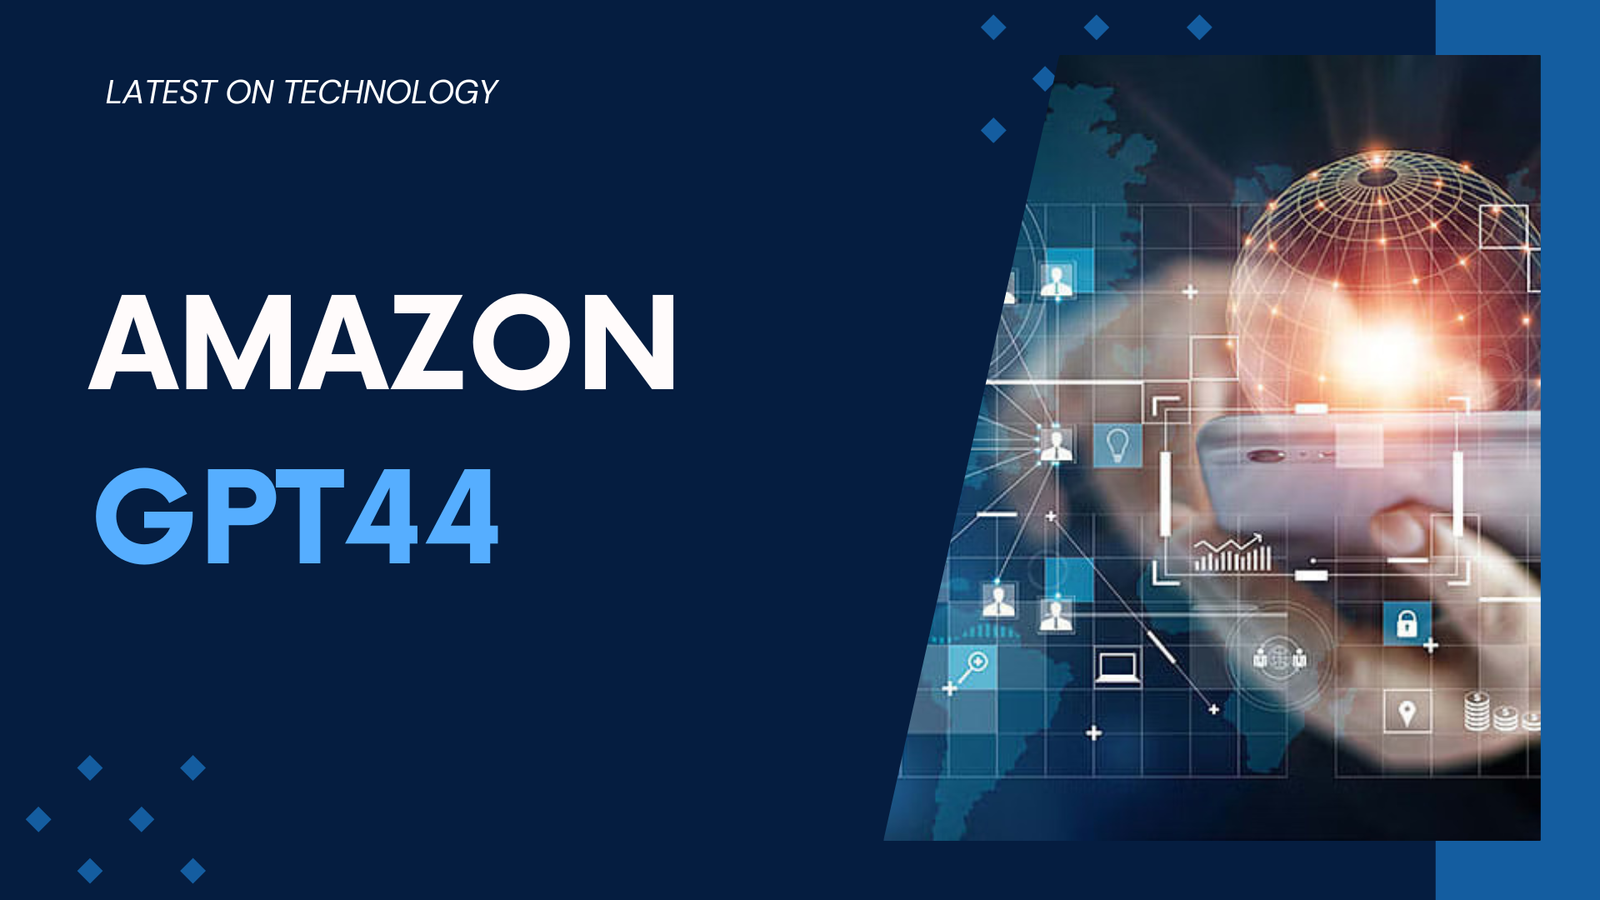 Amazon GPT44: Redefinition of Language Processing and AI